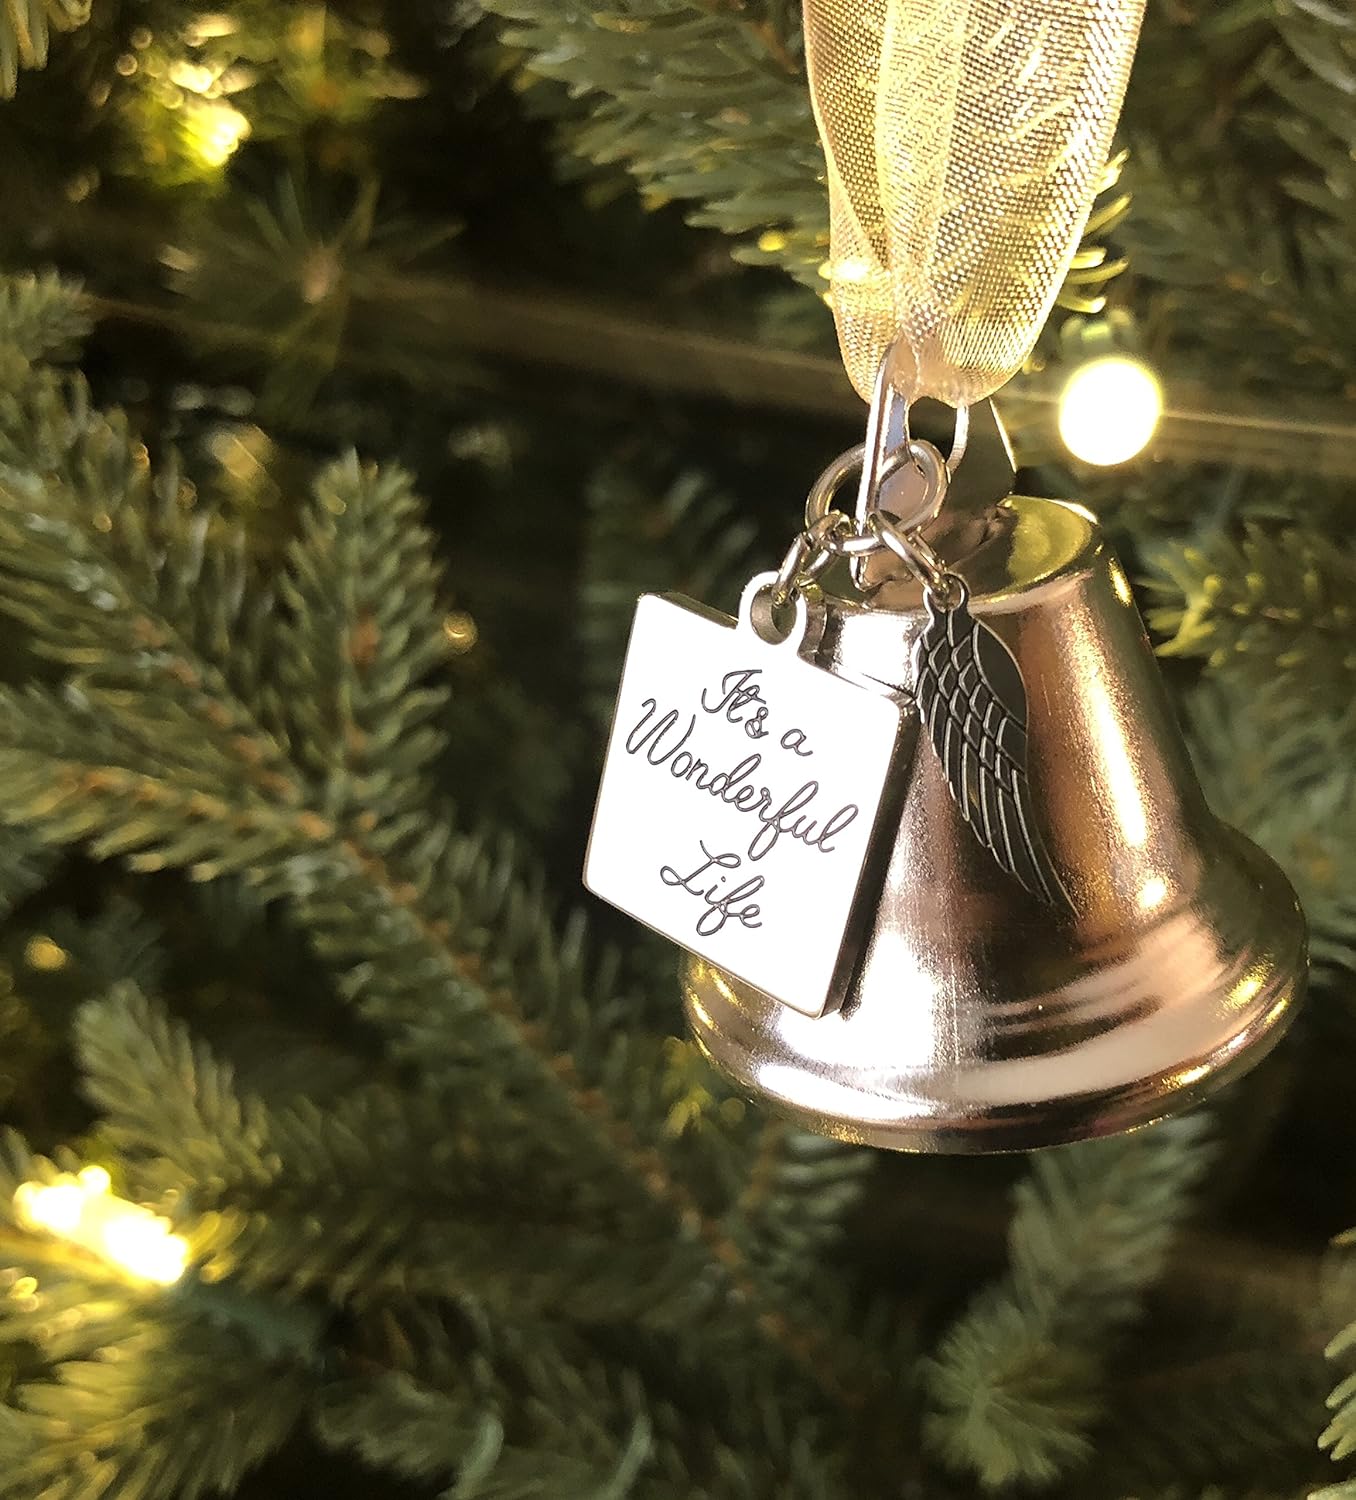 It's a Wonderful Life Inspired Christmas Angel Bell Ornament with Stainless Steel Angel Wing Charm. New Larger Size and Now Comes with 2 Interchangeable Ribbons. (Stainless Steel) - K9King